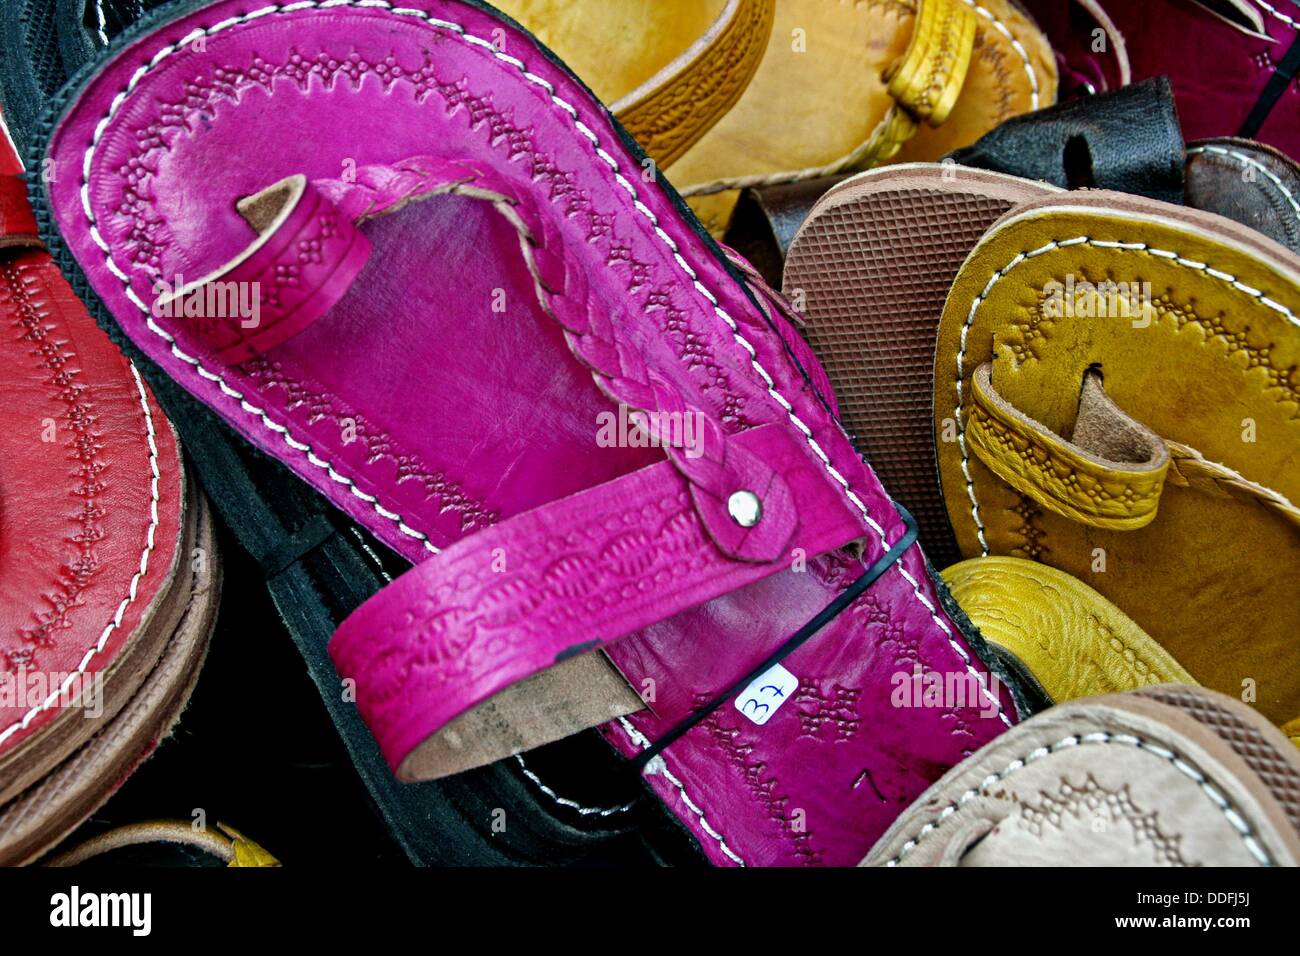 Craft sandals, shoes Stock Photo - Alamy